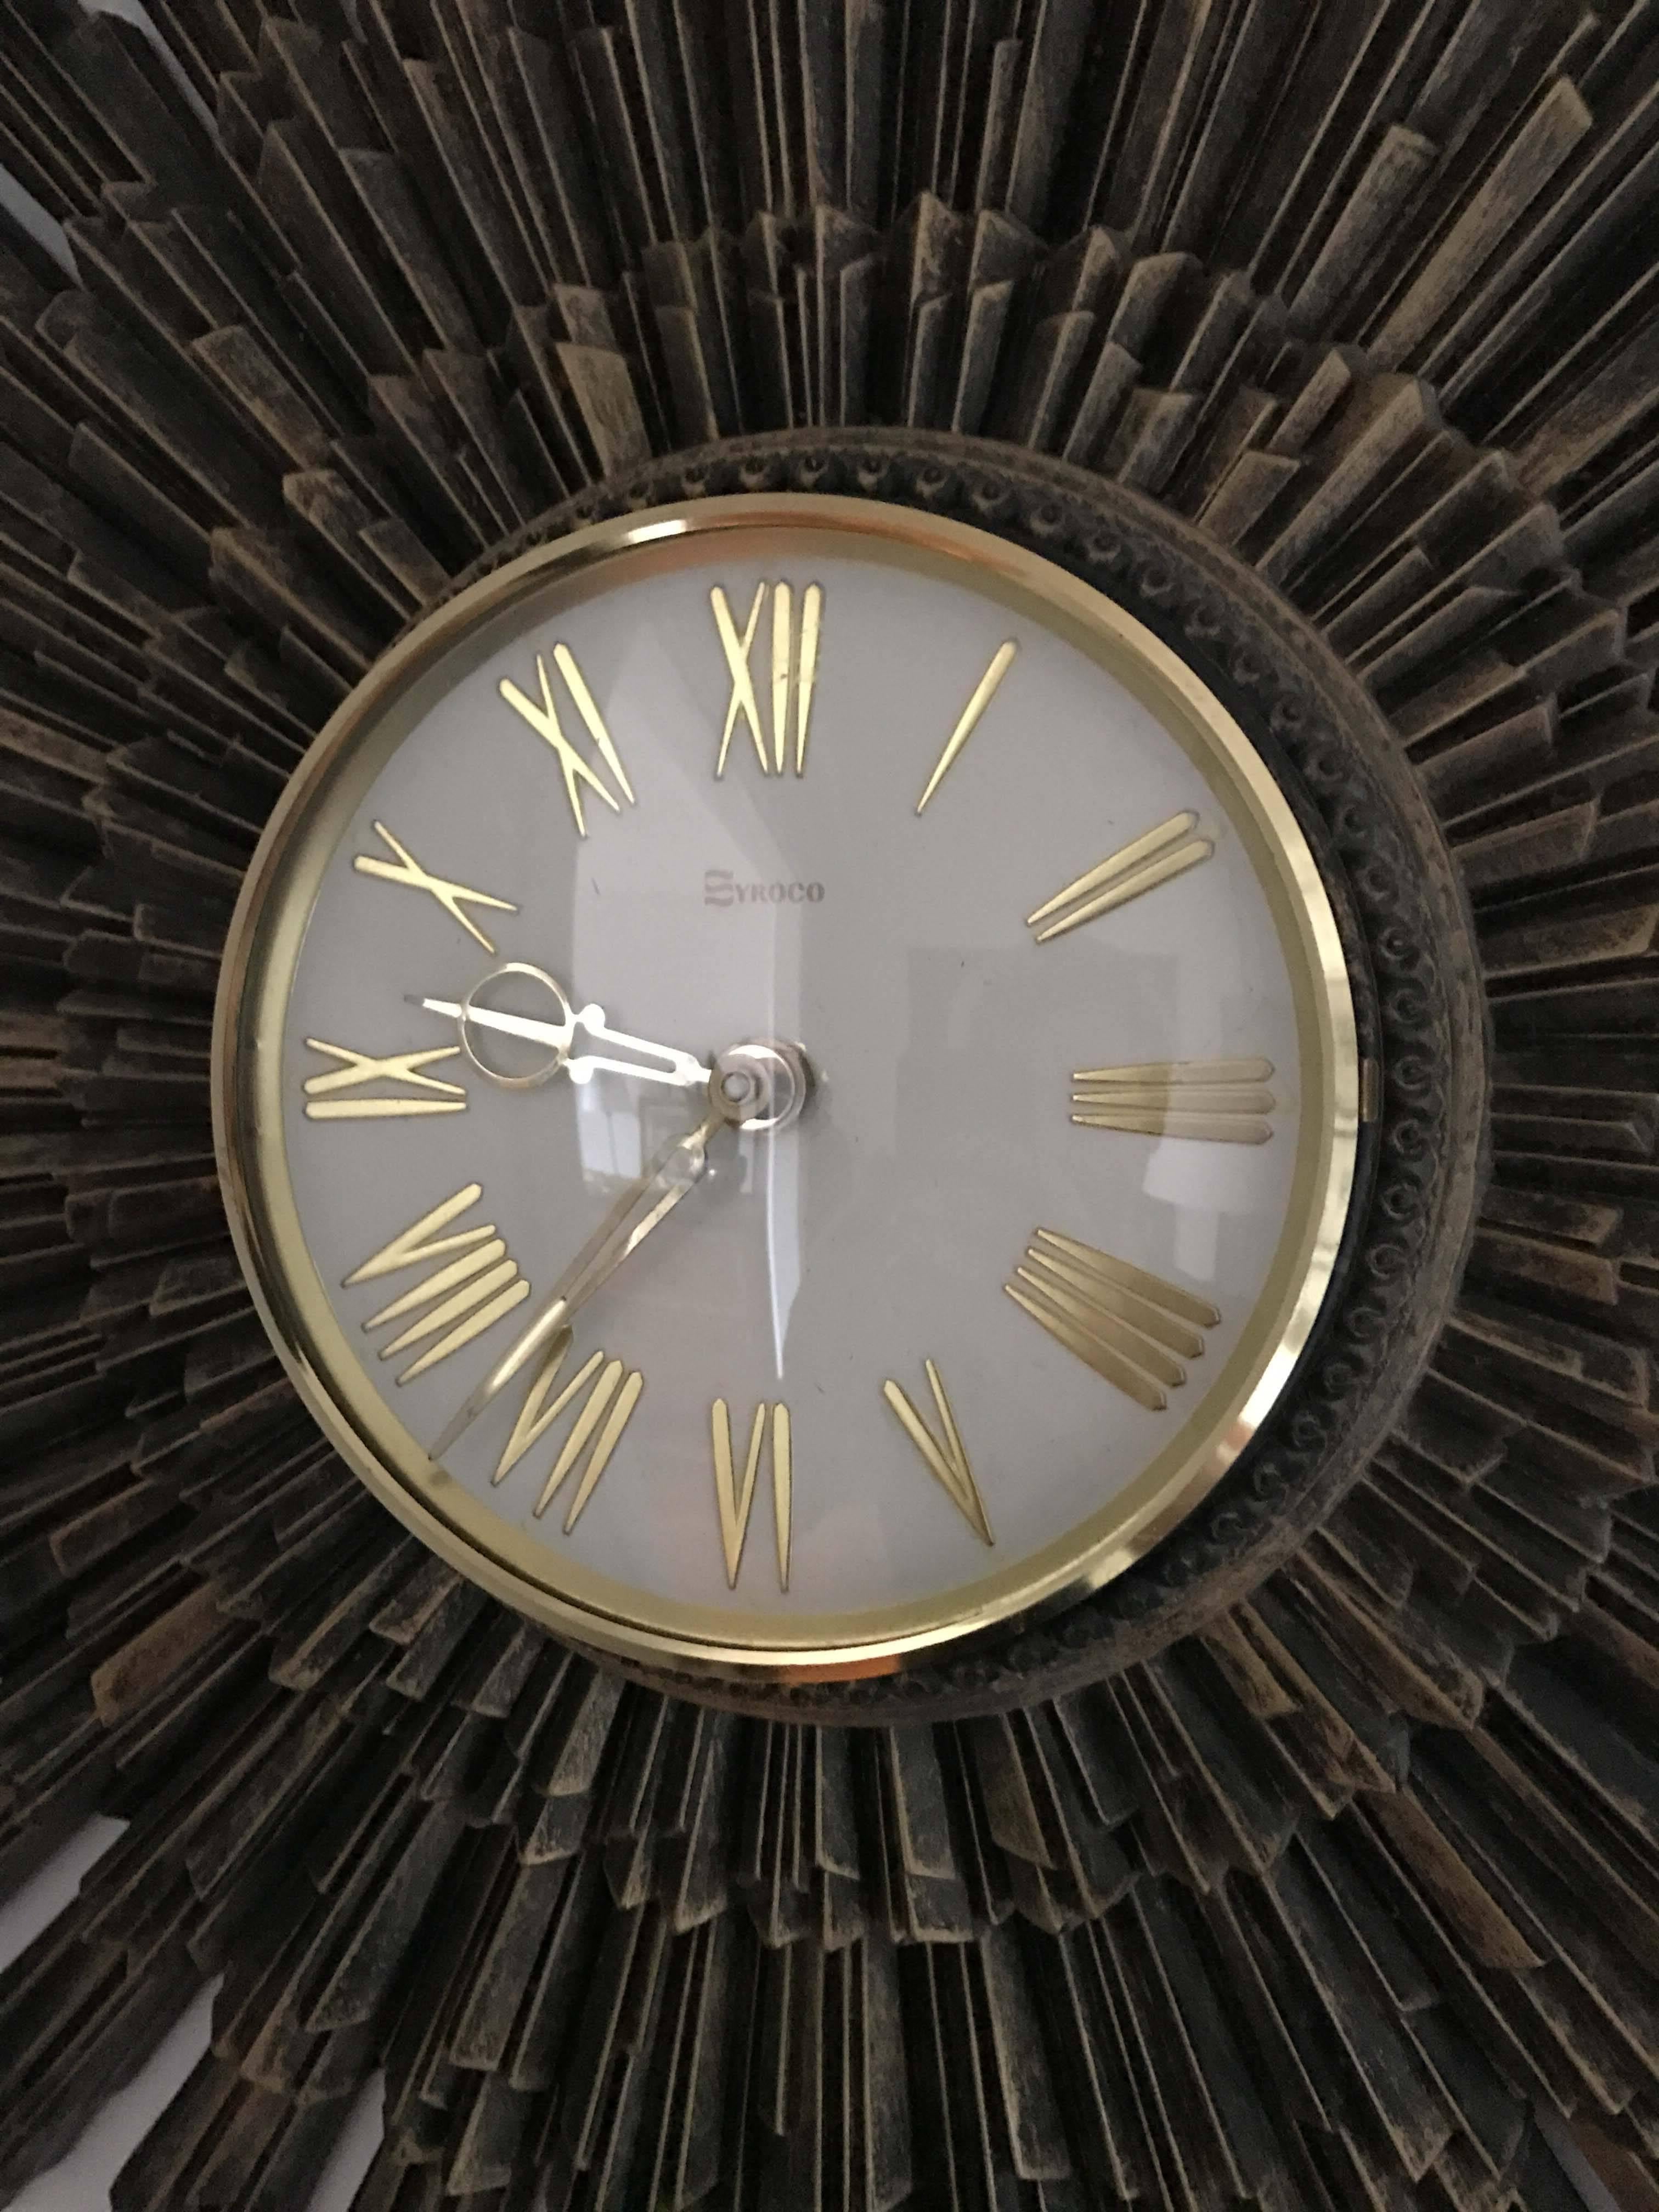 Vintage Syroco starburst resin wall clock in very good overall condition. Original mechanism is battery powered and functional, but will need servicing to tell accurate time. White face with polished brass and glass enclosure.